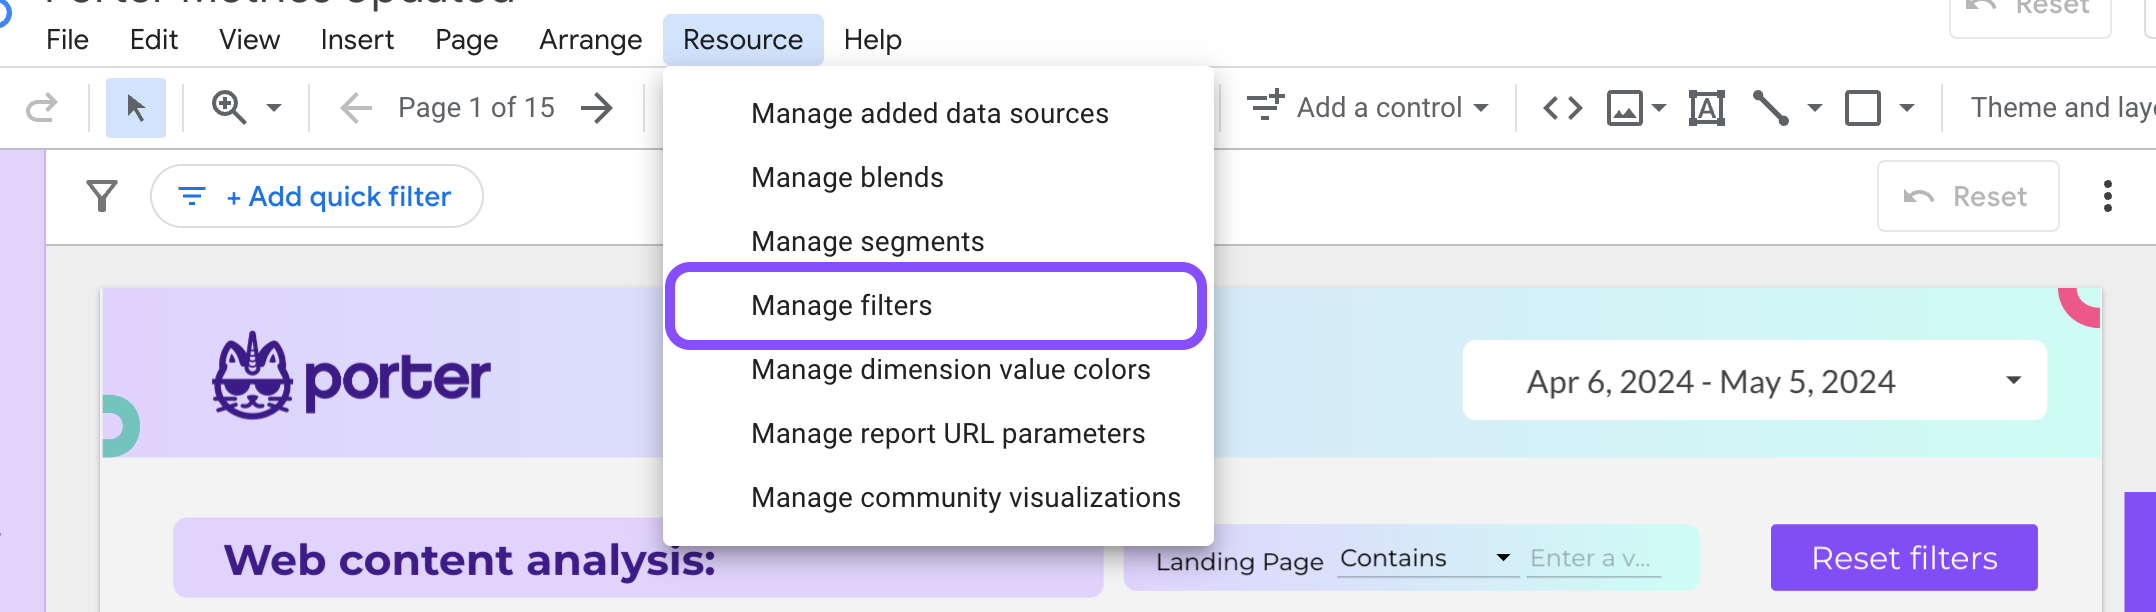 Manage filters on Looker Studio